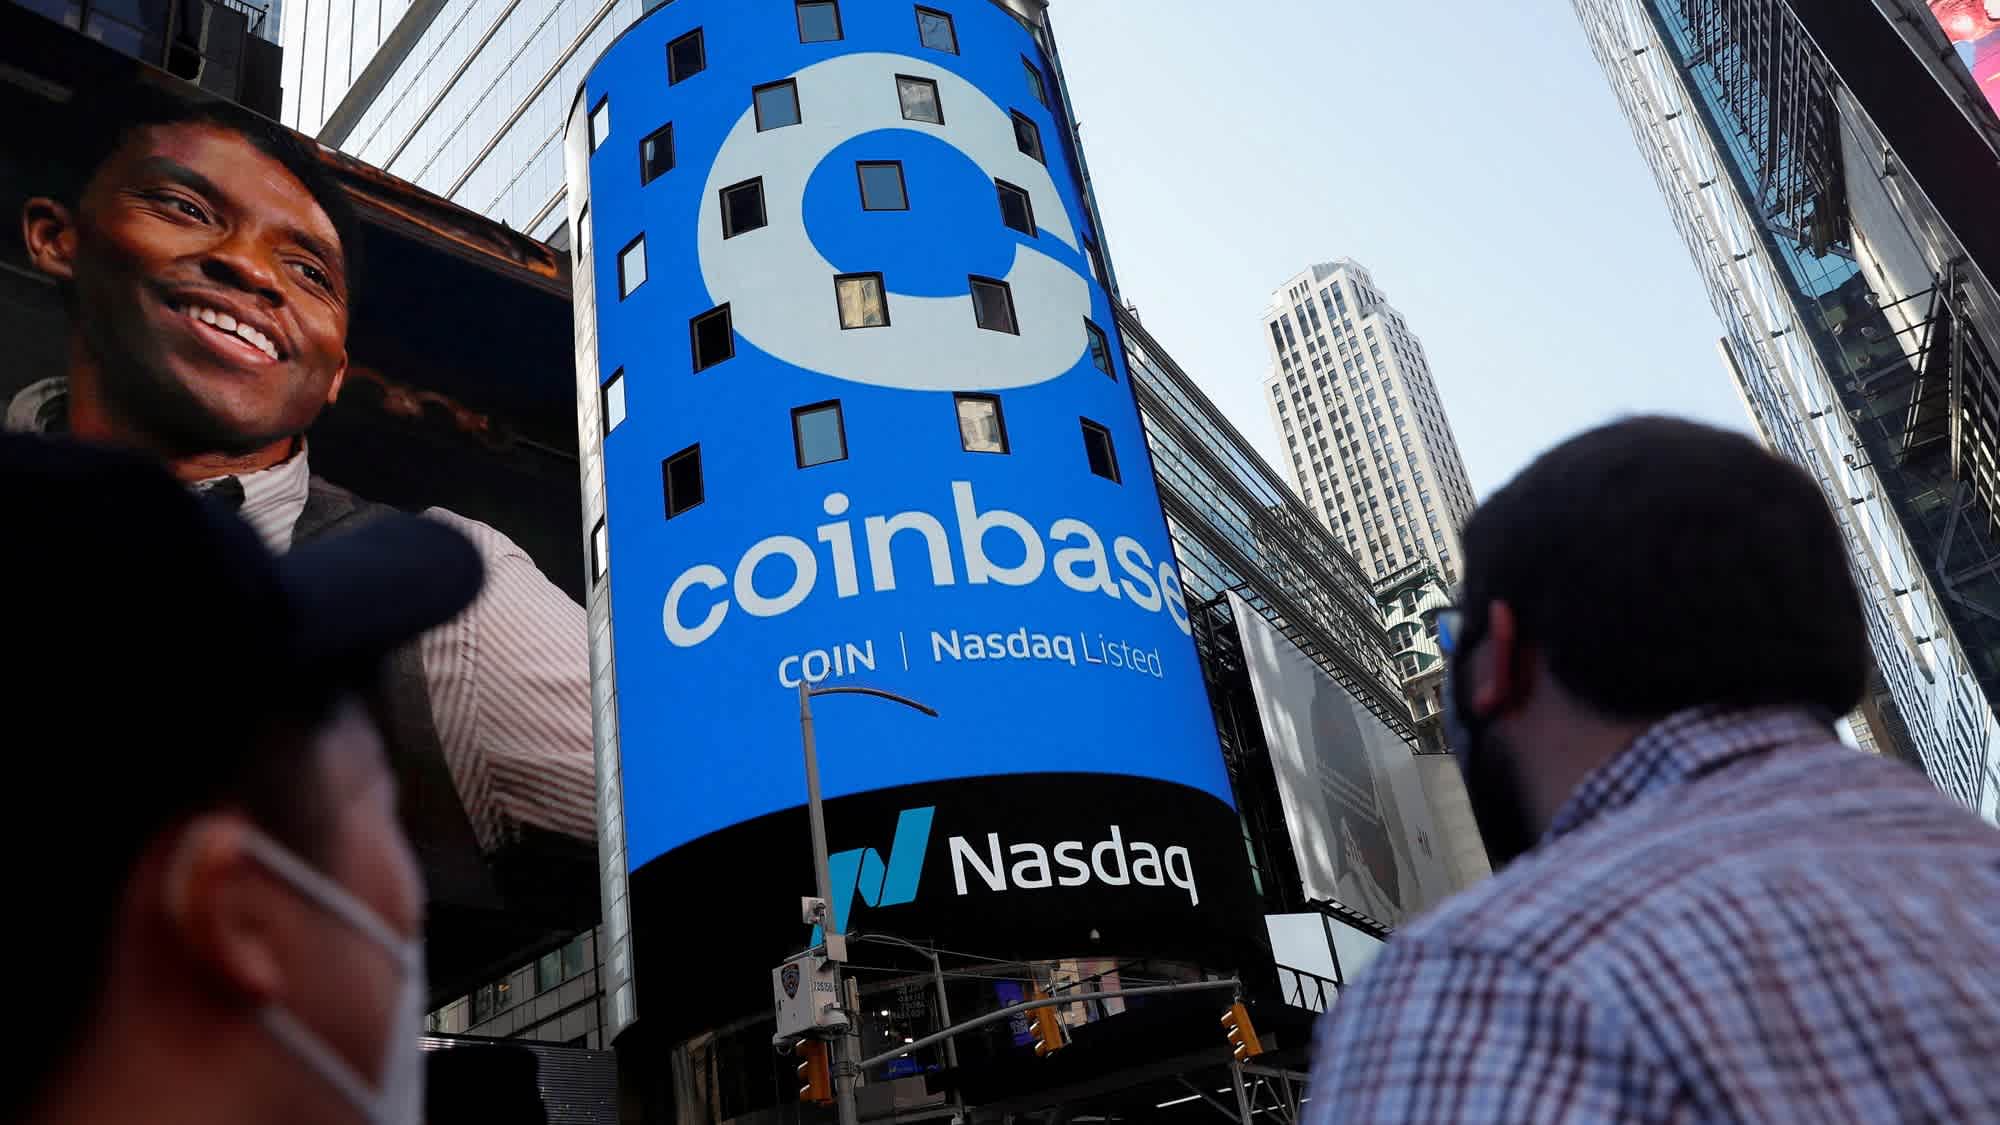 SEC sues Coinbase in widening crackdown on crypto exchanges